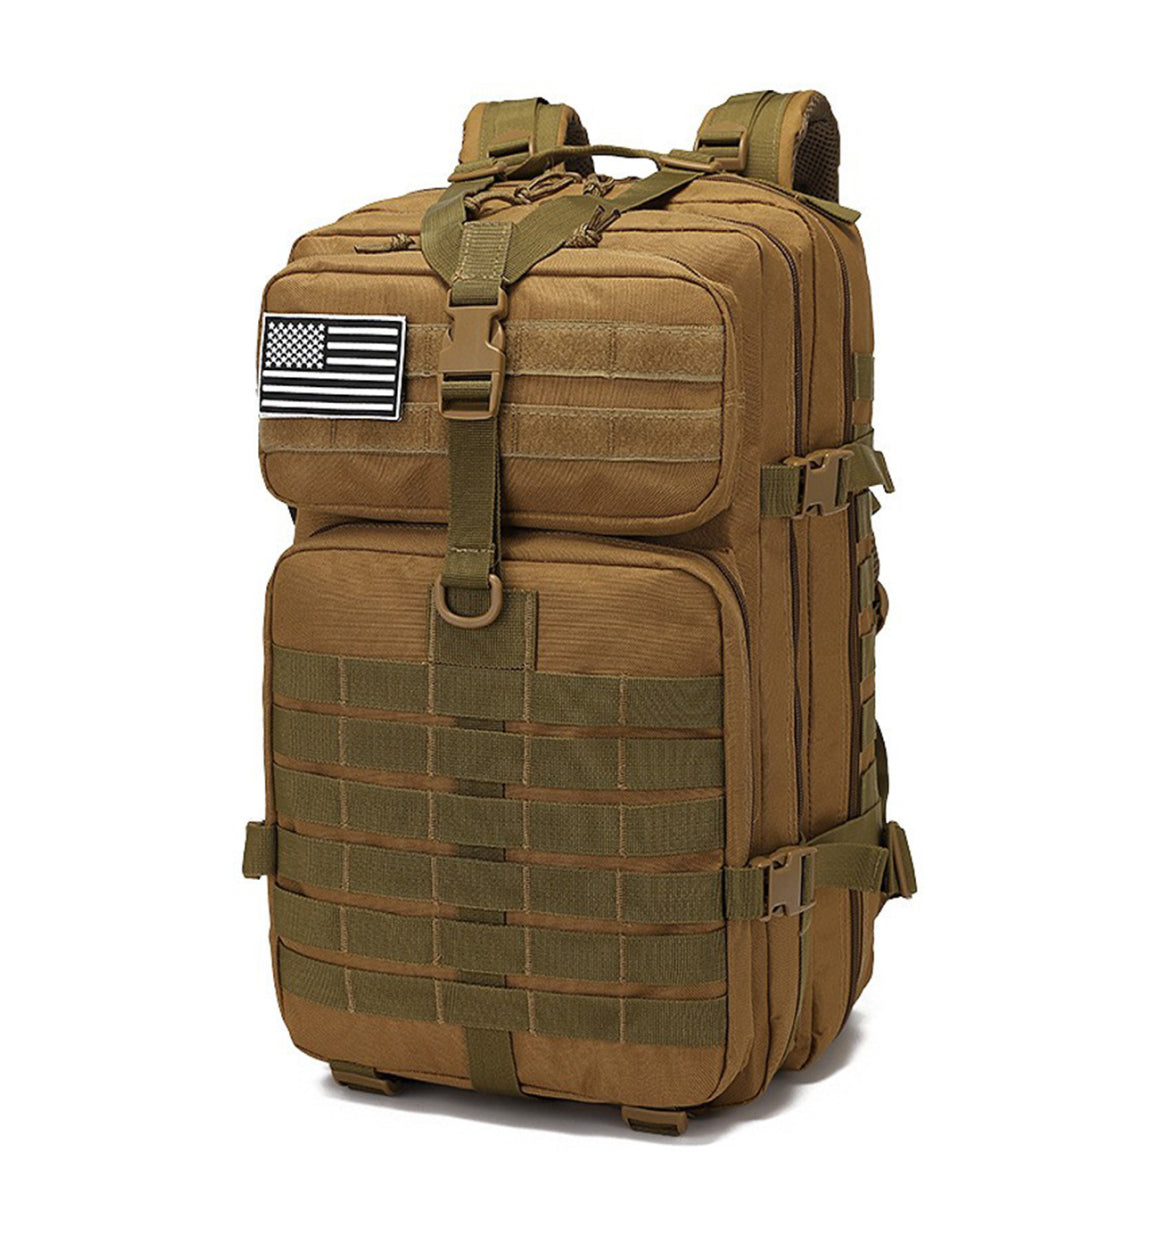 Military Tactical Backpack - Durable and Waterproof Outdoor Gear by Nomads Roam